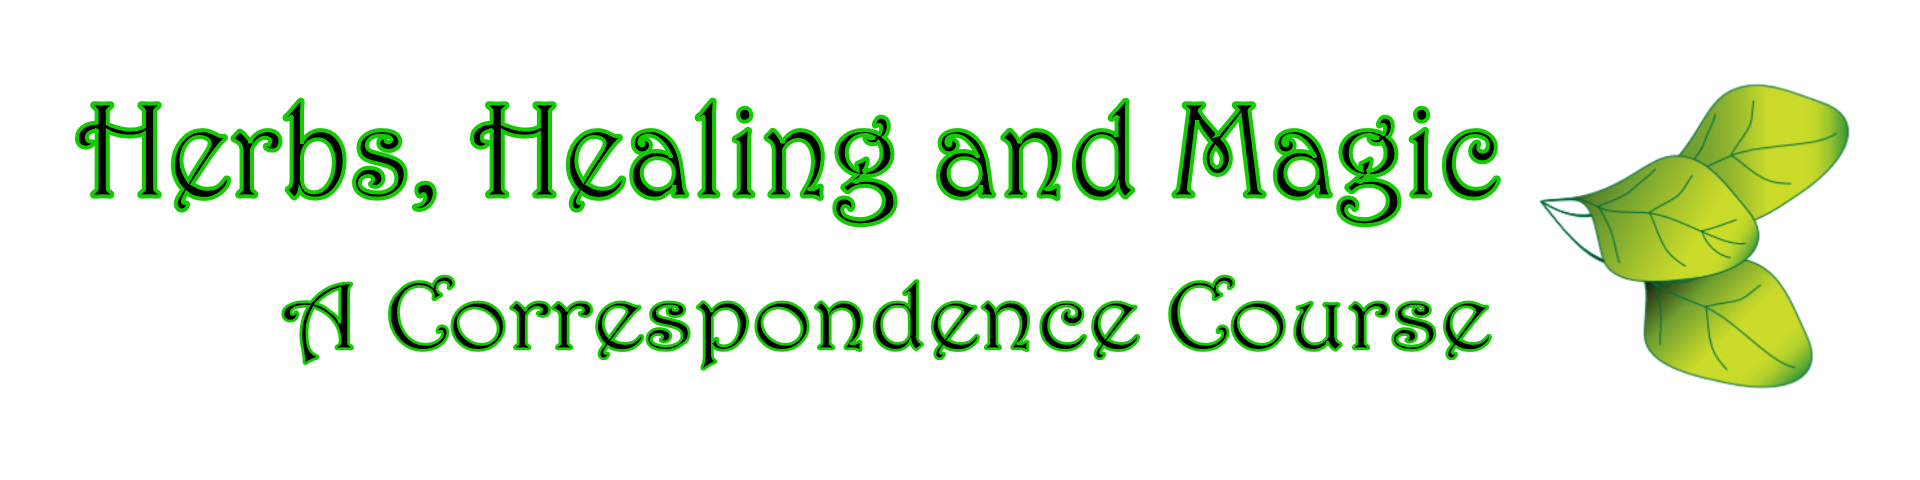 Link to the Herbs, Healing and Magic Correspondence Course